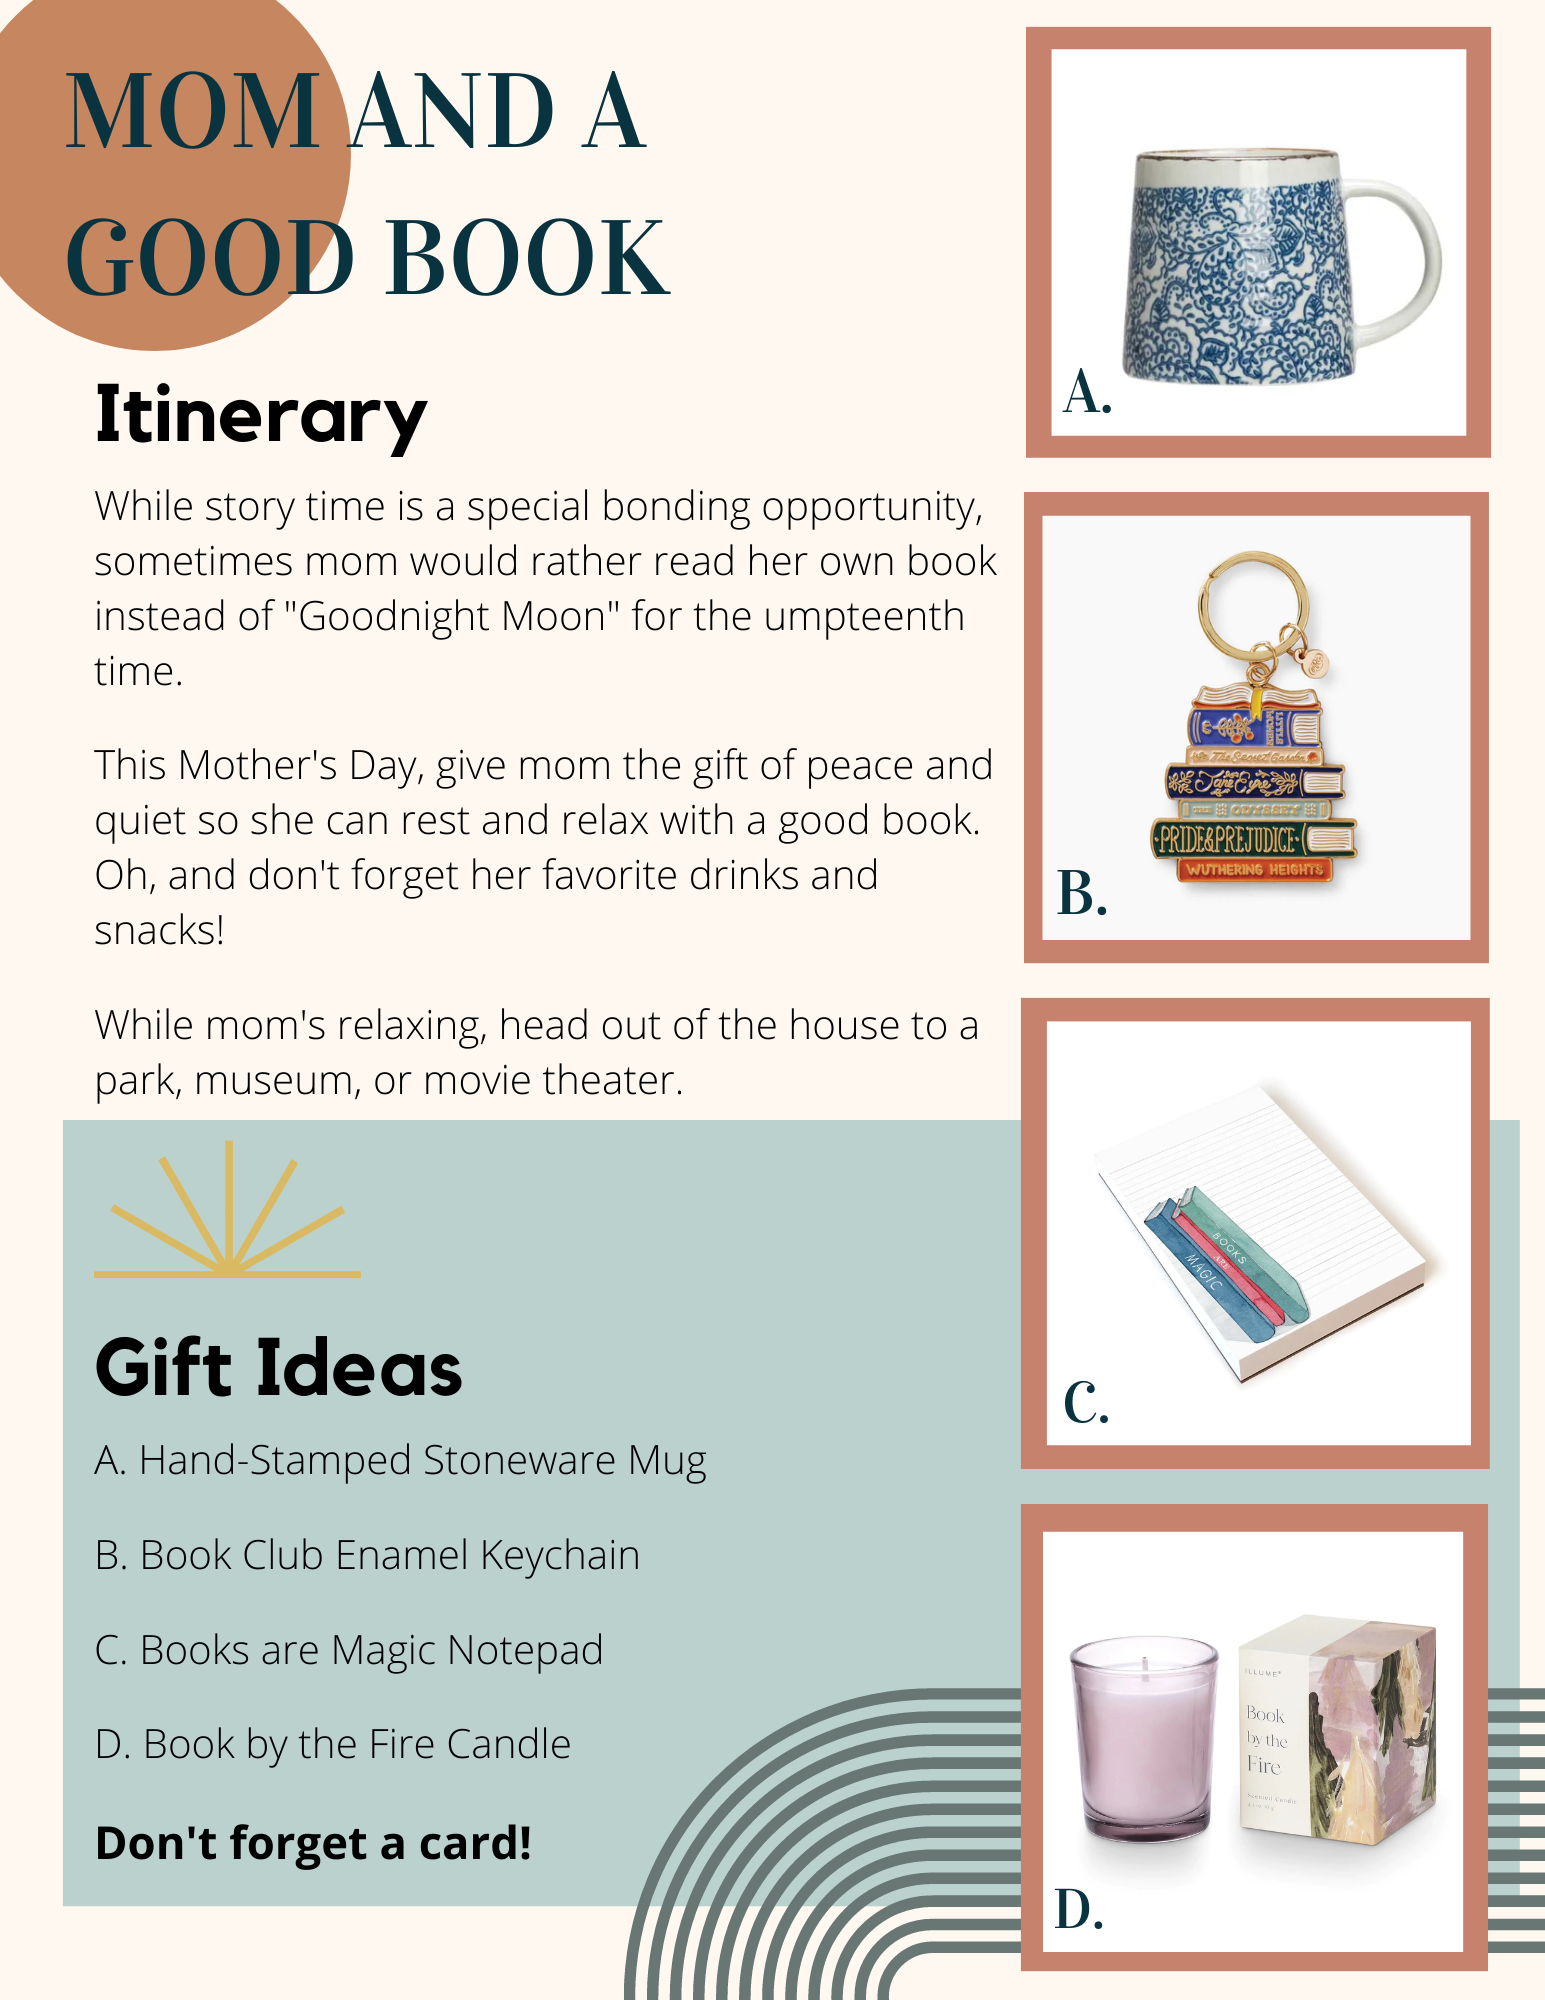 "Mom and a Good Book." Itinerary: Get out of the house so mom can read in peace. Gift Ideas: Mug, book keychain, notepad with books painted on it, candle called "Book by the Fire."